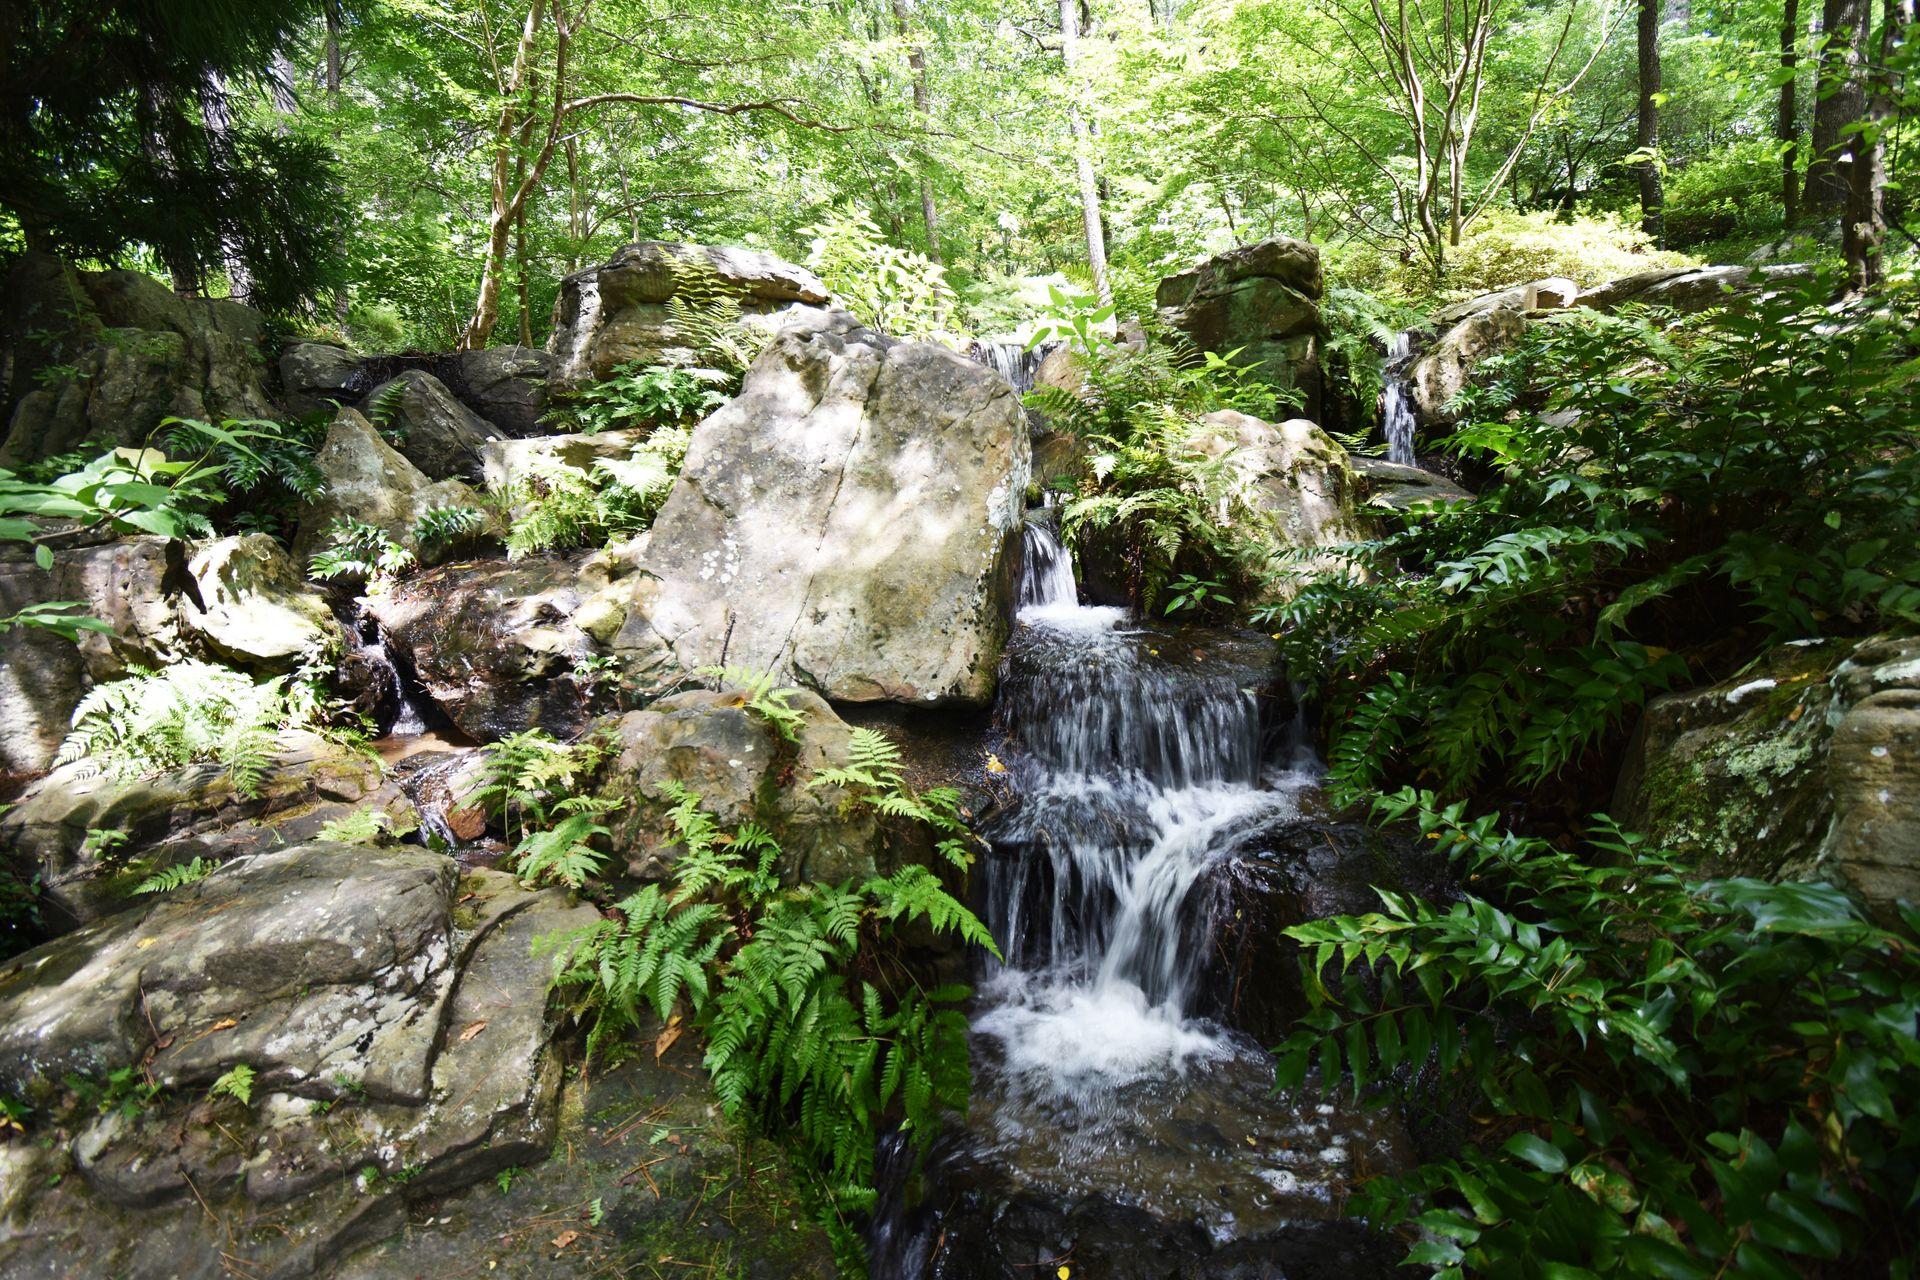 A small waterfall cascading down rocks surrounded by greenery.